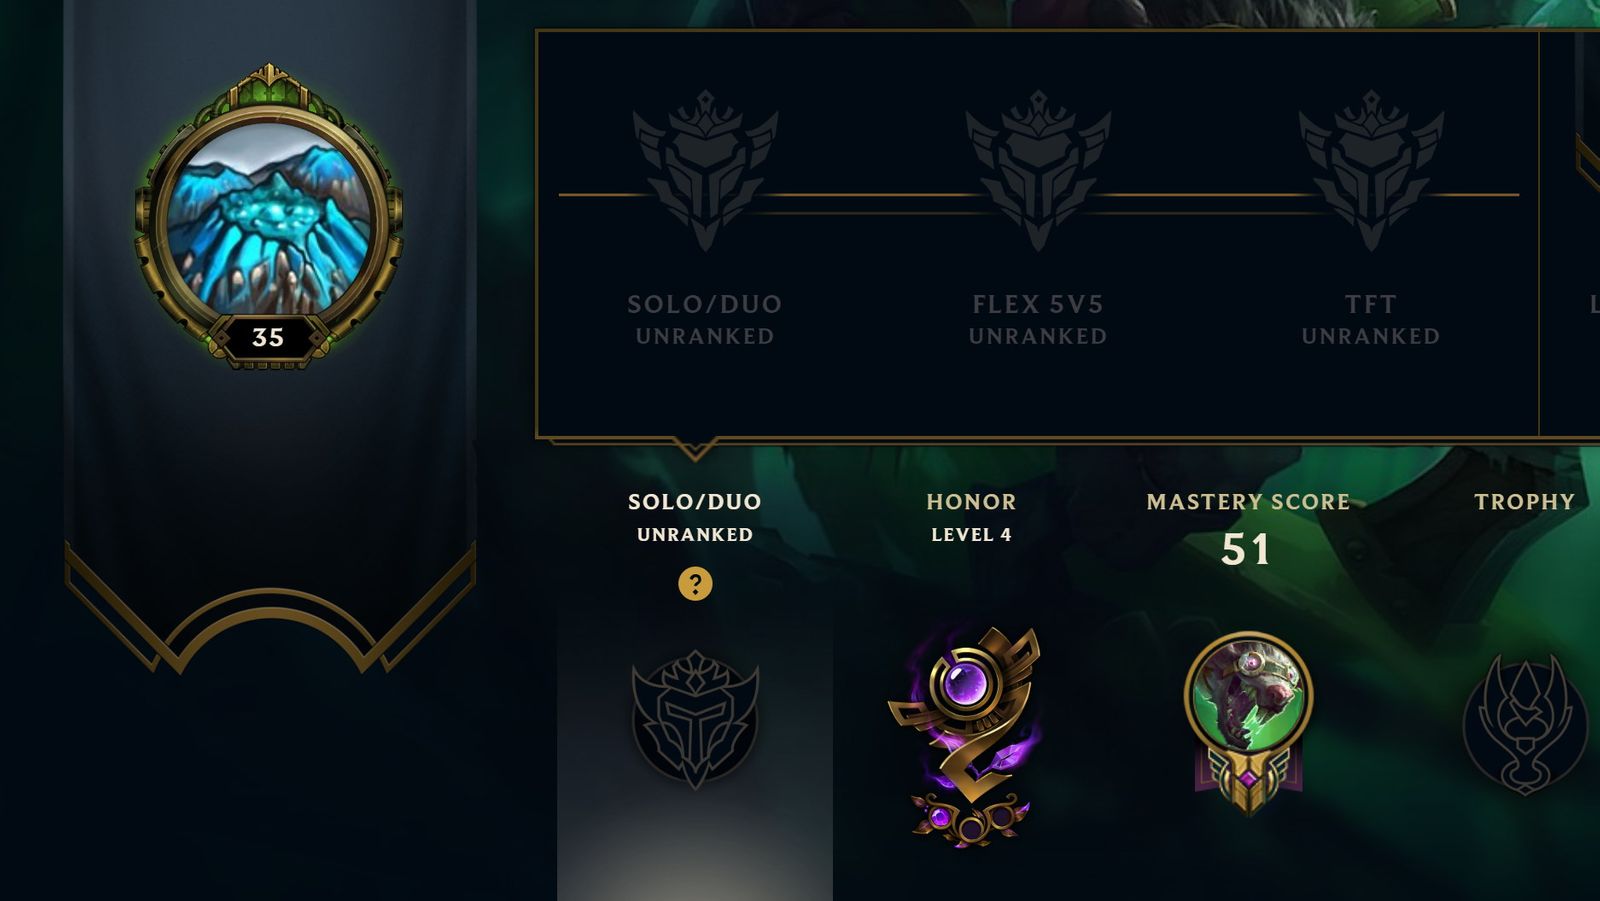 League of Legends: Ranked Start Season 11 and all Patches in 2021